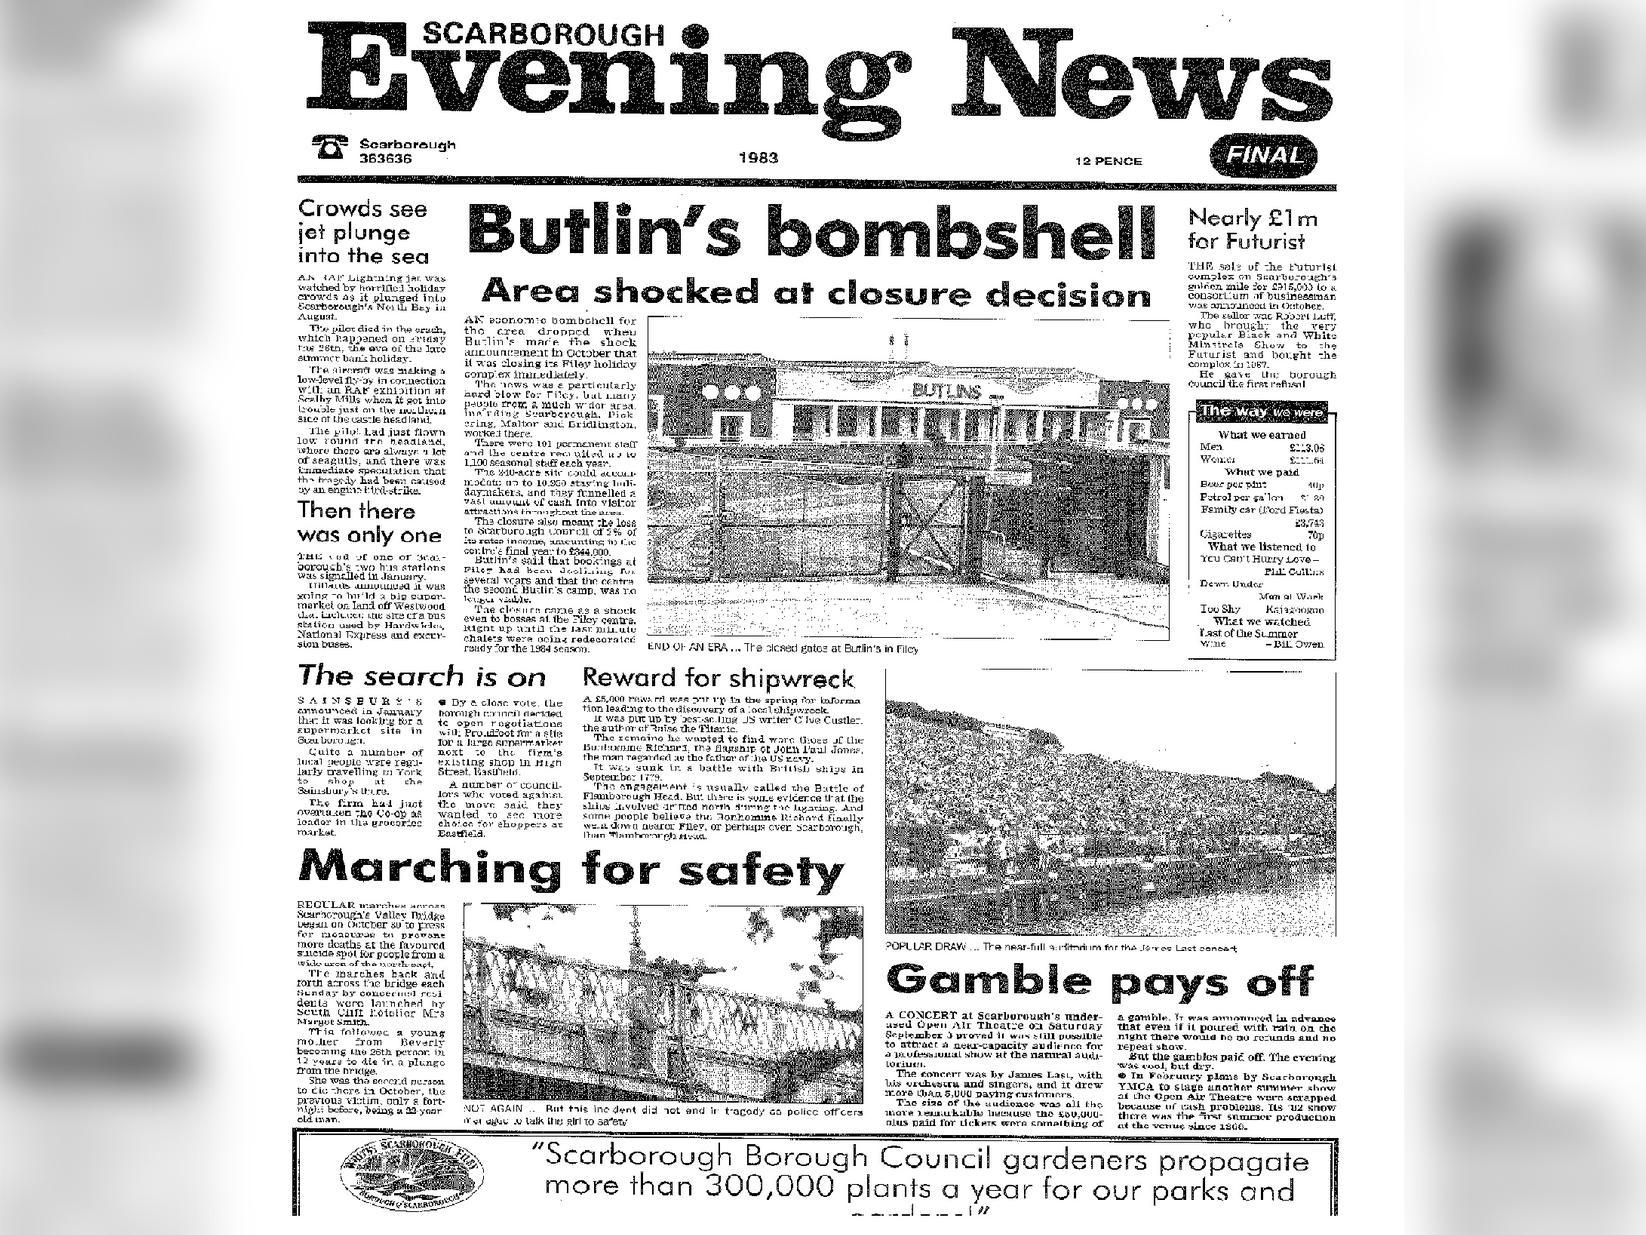 Butlin's closed its Filey holiday complex in October. In the same month, the Futurist theatre was sold for nearly 1 million to a consortium of businessmen.